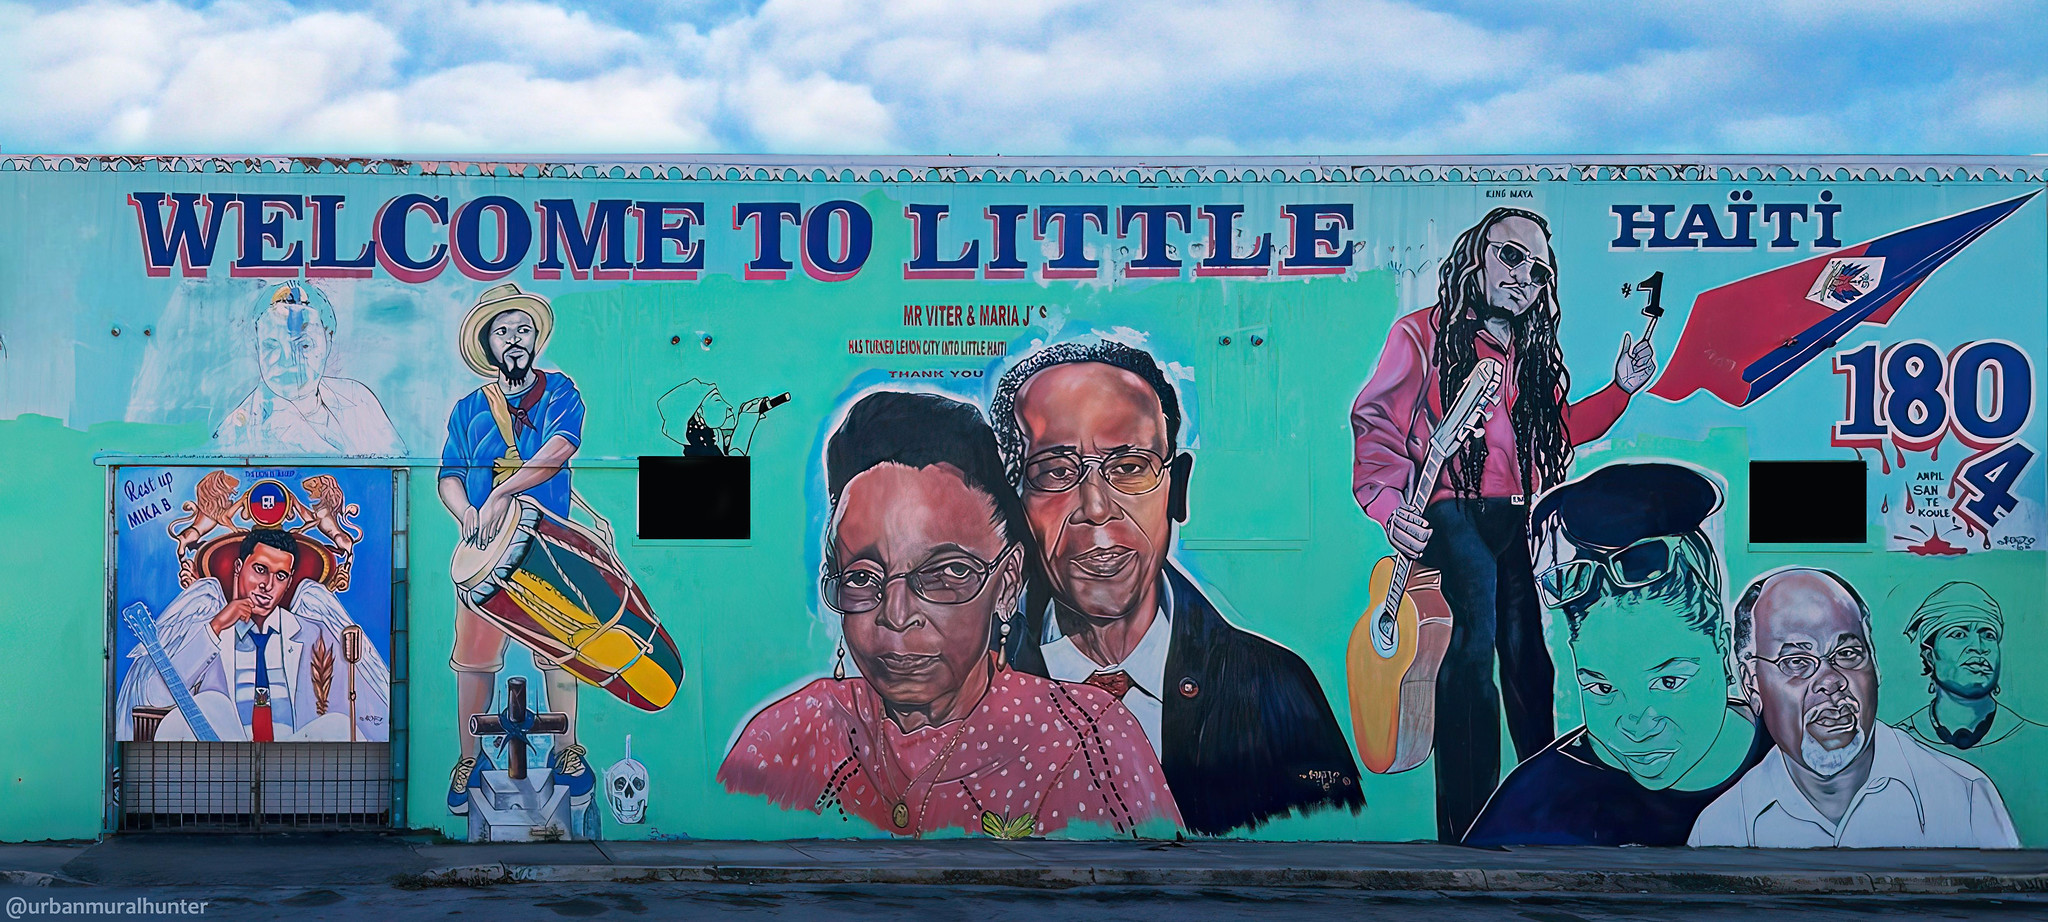 Collaborative mural by local Miami artists, seen at 220 NE 59th Street in the Little Haiti area of Miami, Florida.     Photo by James aka @urbanmuralhunter on that other photo site.